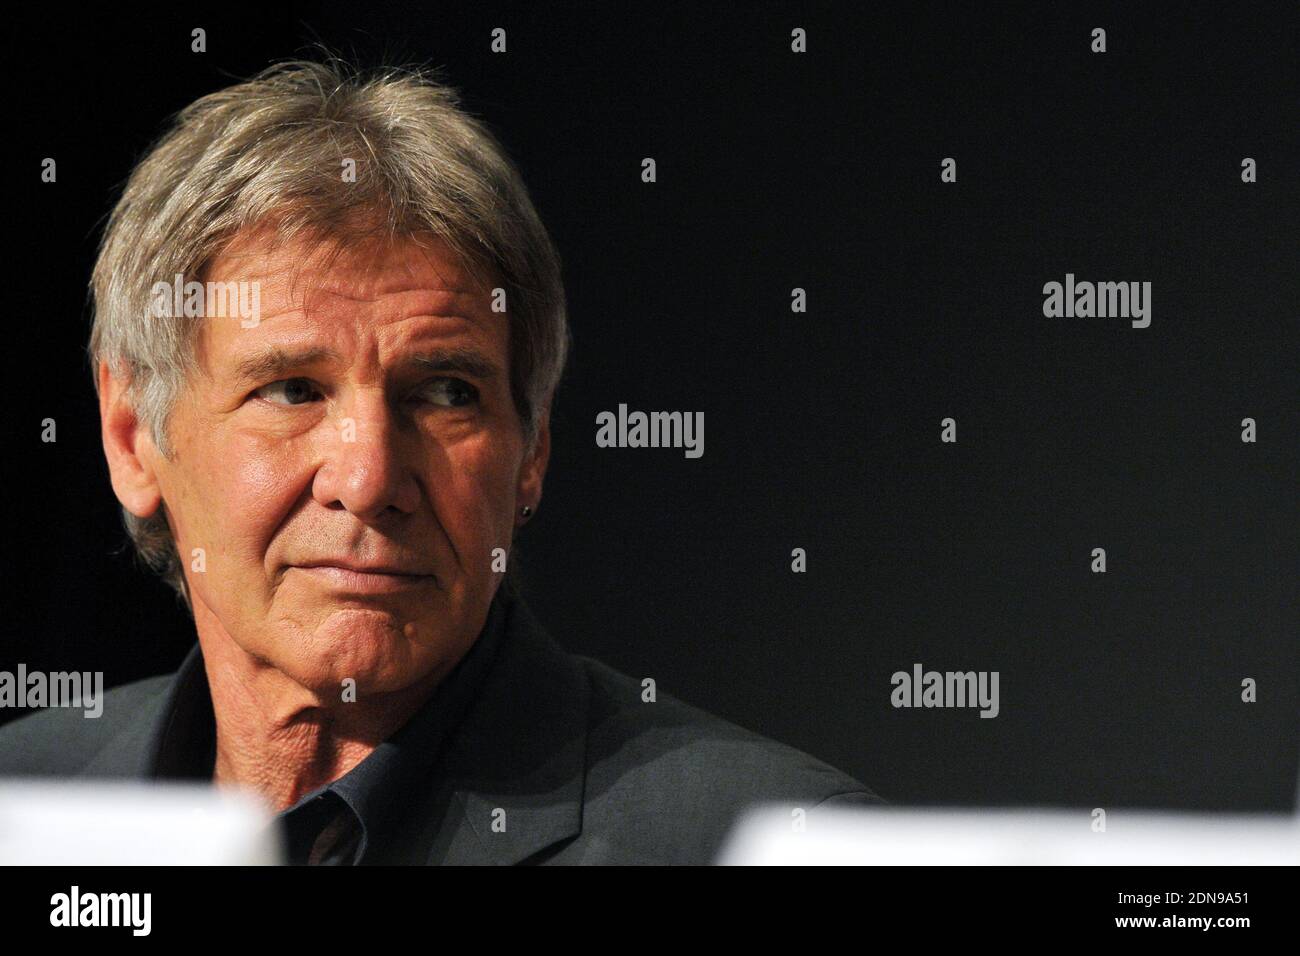 File photo : Harrison Ford attends a press conference for the film 'Indiana Jones and The Kingdom of The Crystal Skull' at the Palais des Festivals during the 61st International Cannes Film Festival in Cannes, France on May 18, 2008. The 72-year-old, star of the Indiana Jones and Star Wars films, reported engine failure and crash-landed his vintage plane on a Venice golf course in Los Angeles. He was breathing and alert when medics arrived and took him to hospital in a 'fair to moderate' condition, a fire department spokesman said. Photo by Eric Catarina/Pool/ABACAPRESS.COM Stock Photo